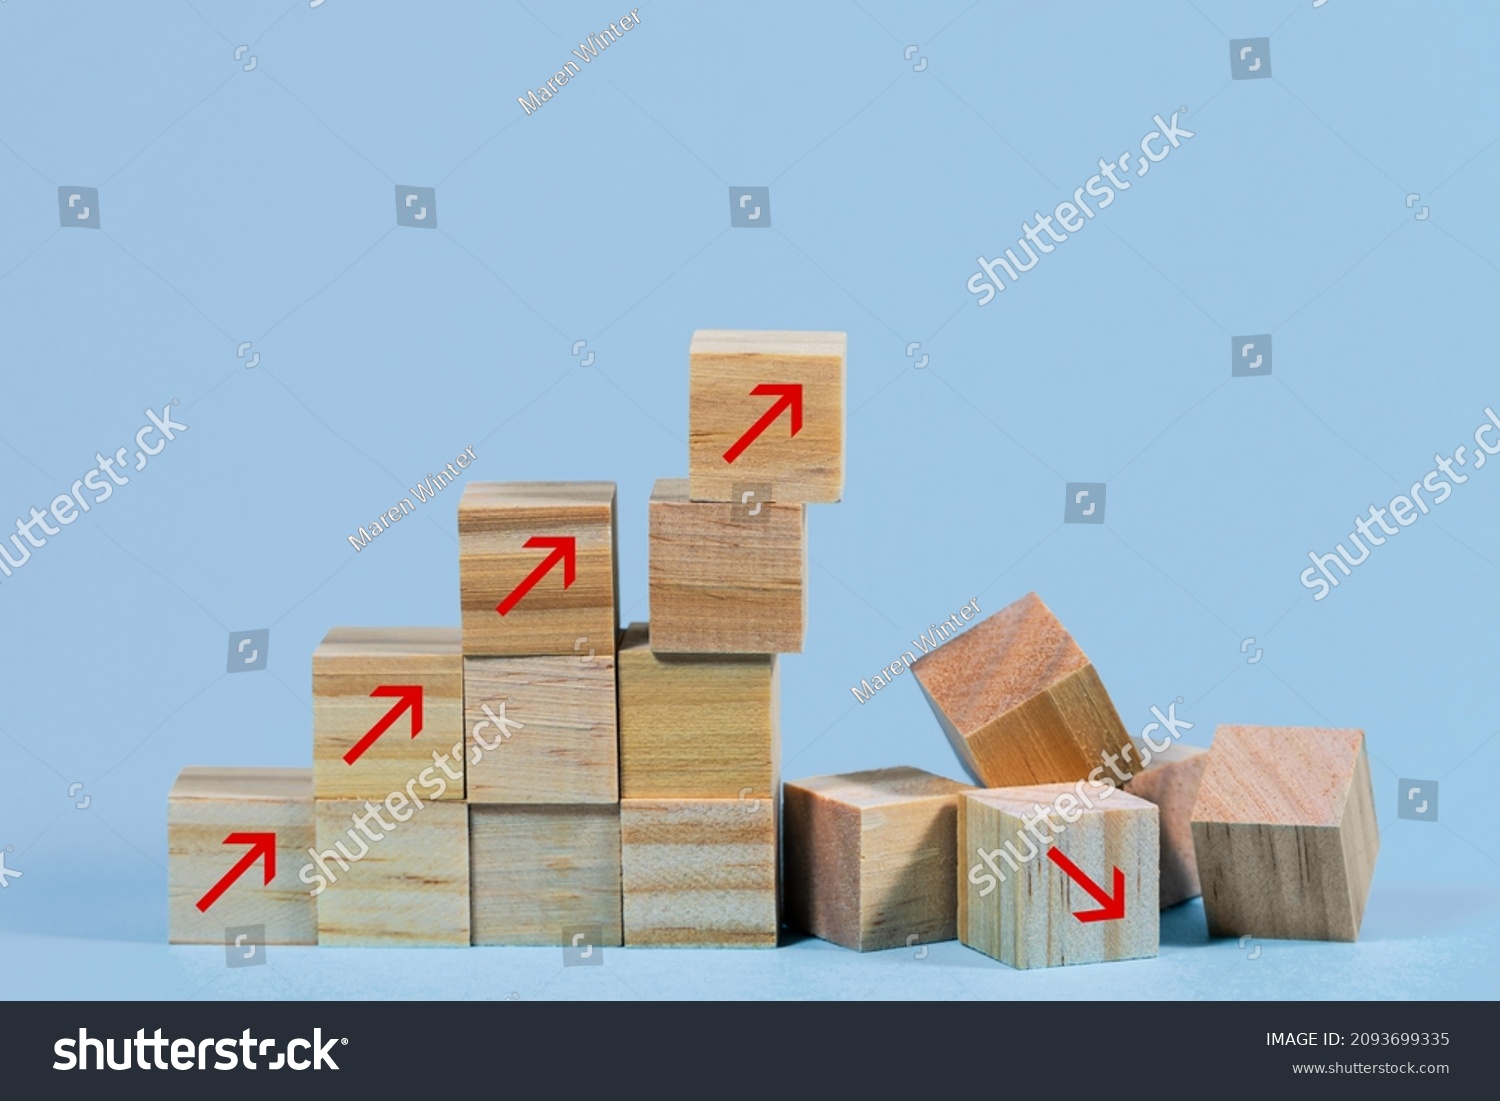 Collapsed stair structure of wooden cubes with upward pointing arrows, business risk due to inflation, crisis, supply shortage or unsustainable financial concept, blue background with copy space #2093699335